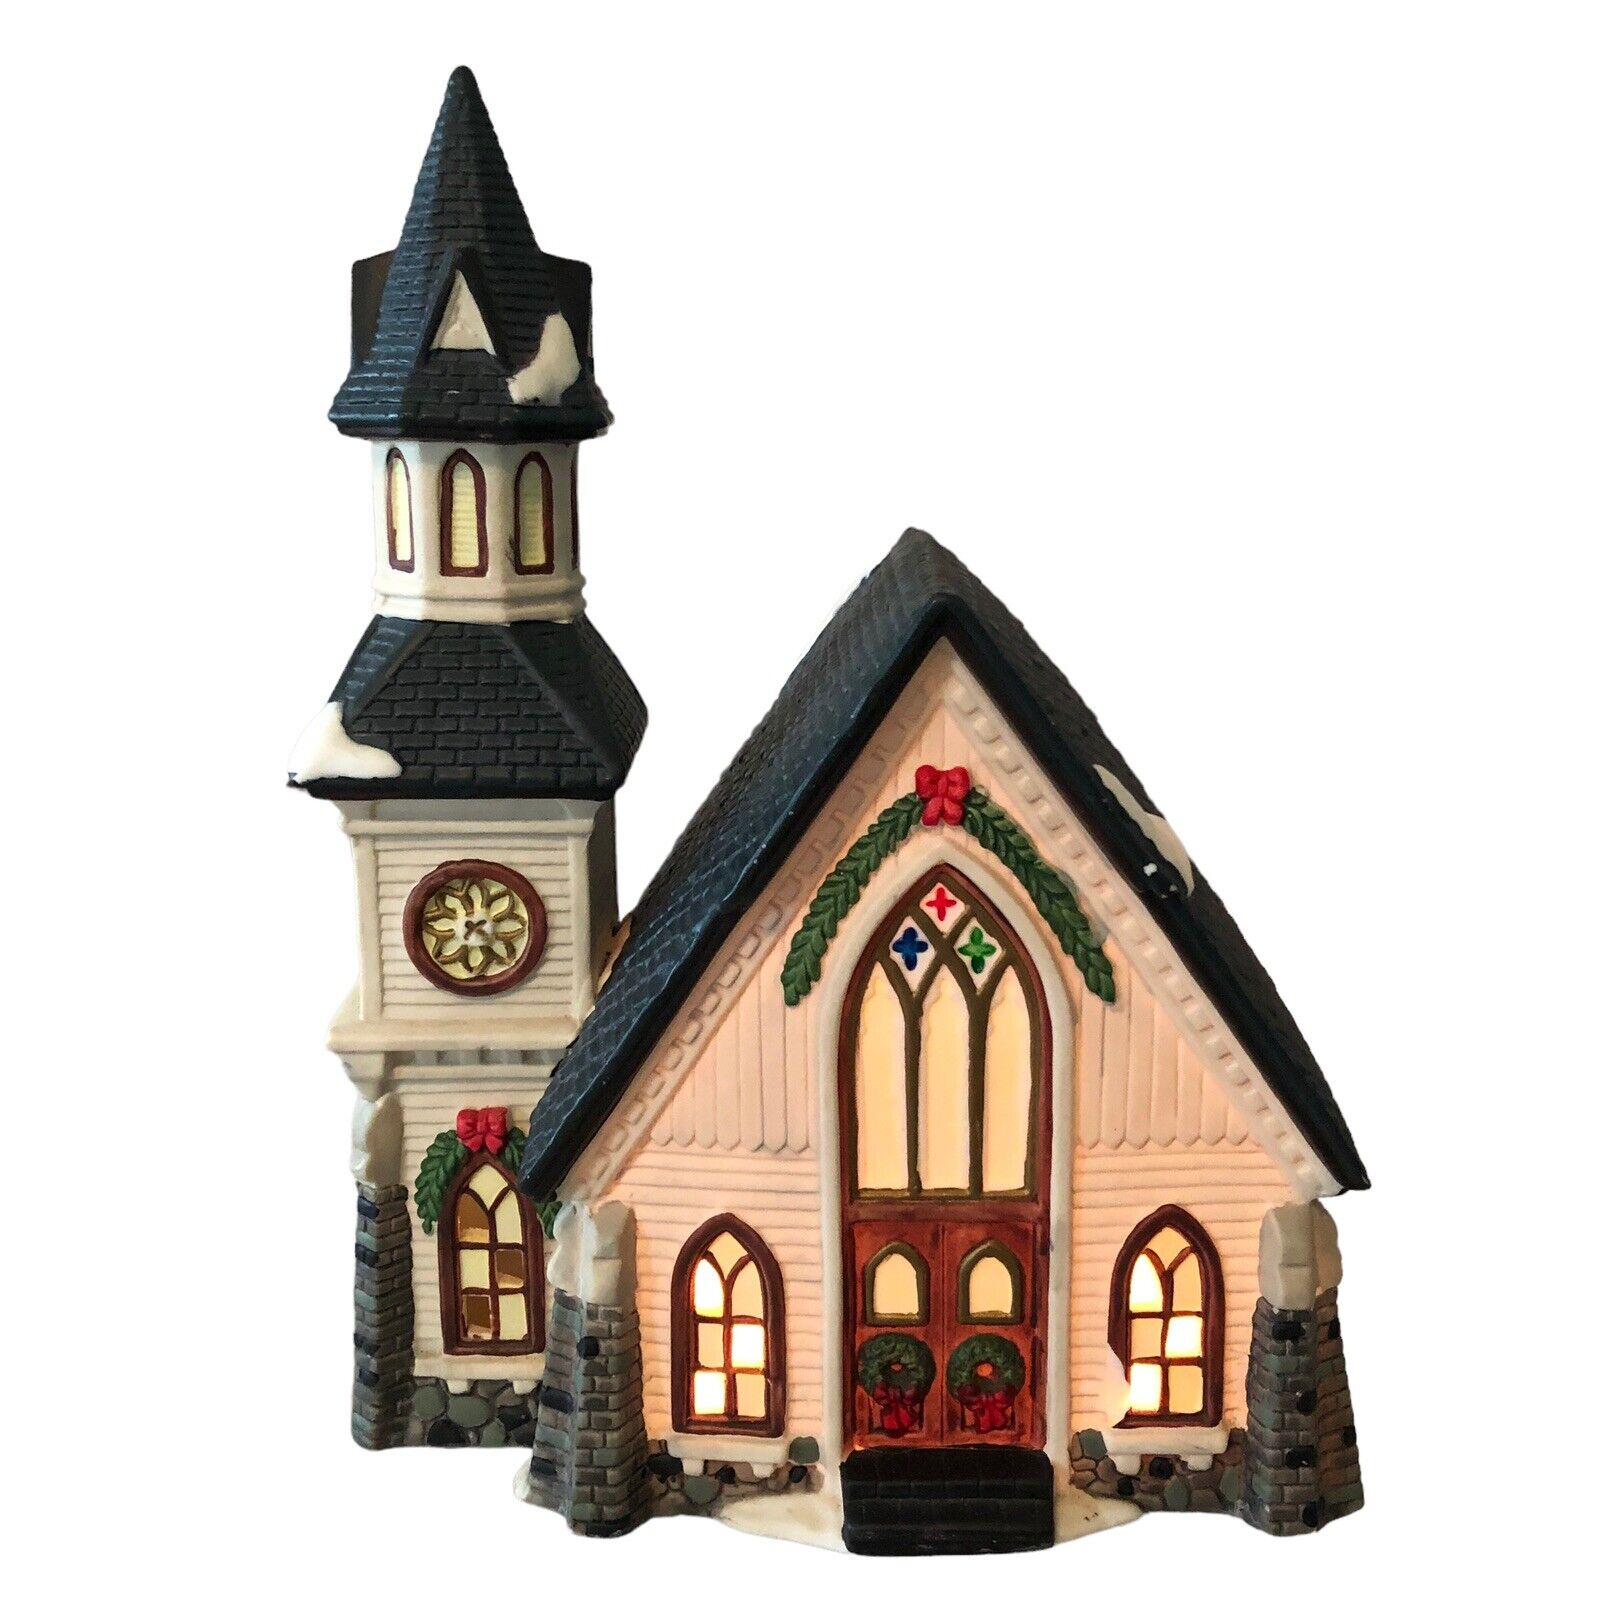 O’Well-Heartland Valley Village Church Deluxe Porcelain Lighted House 1998 LE